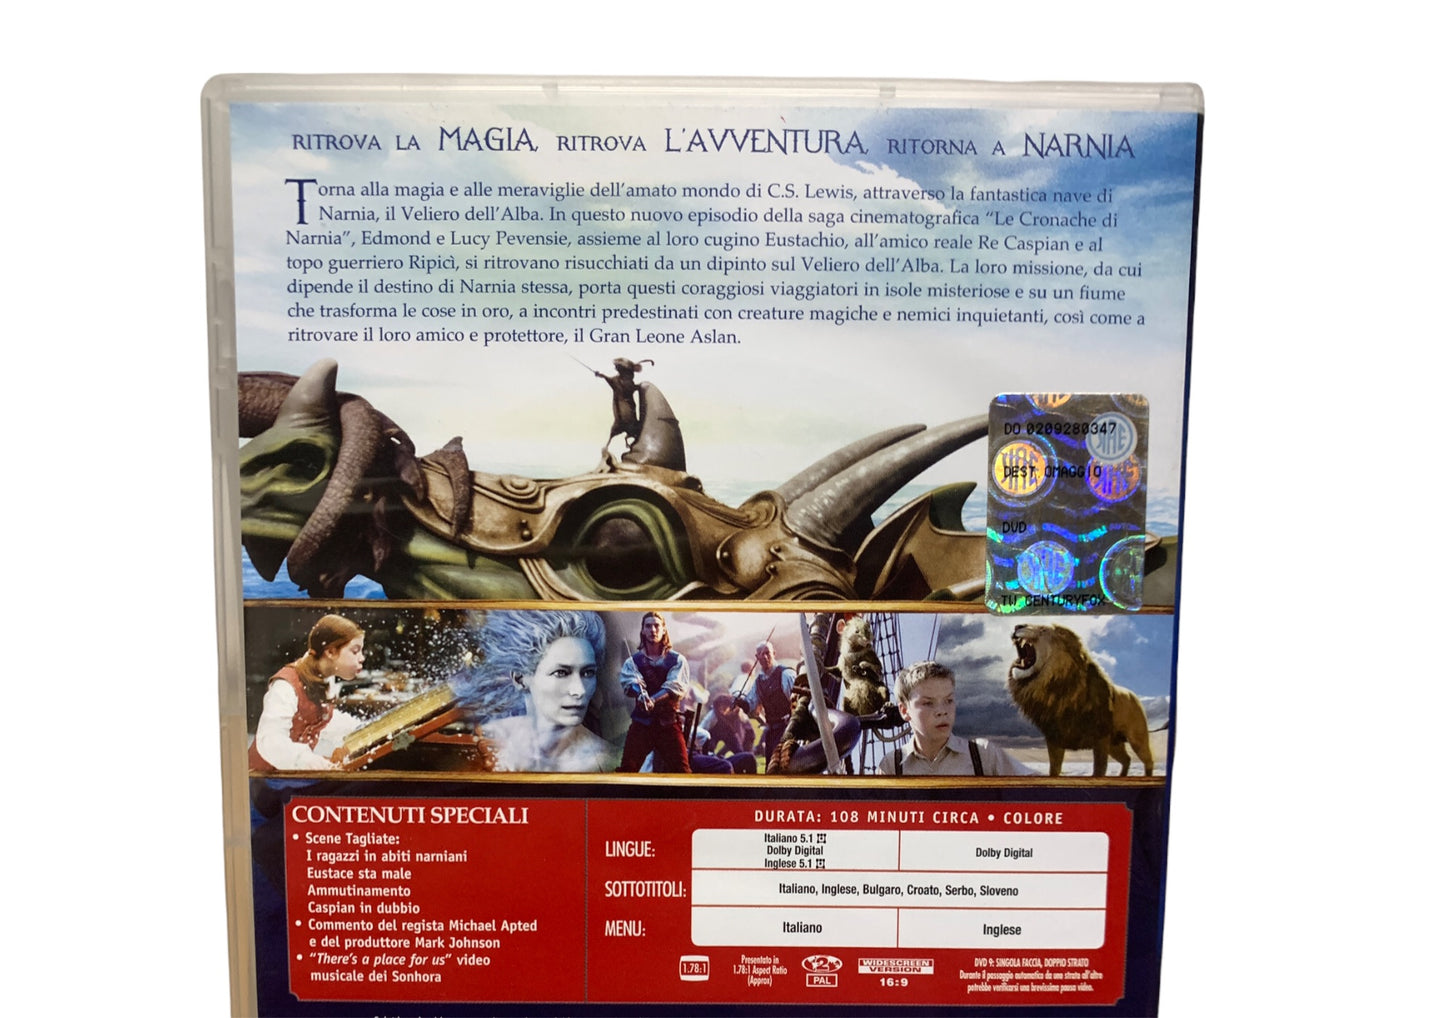 DVD The Chronicles of Narnia - The Voyage of the Dawn Treader